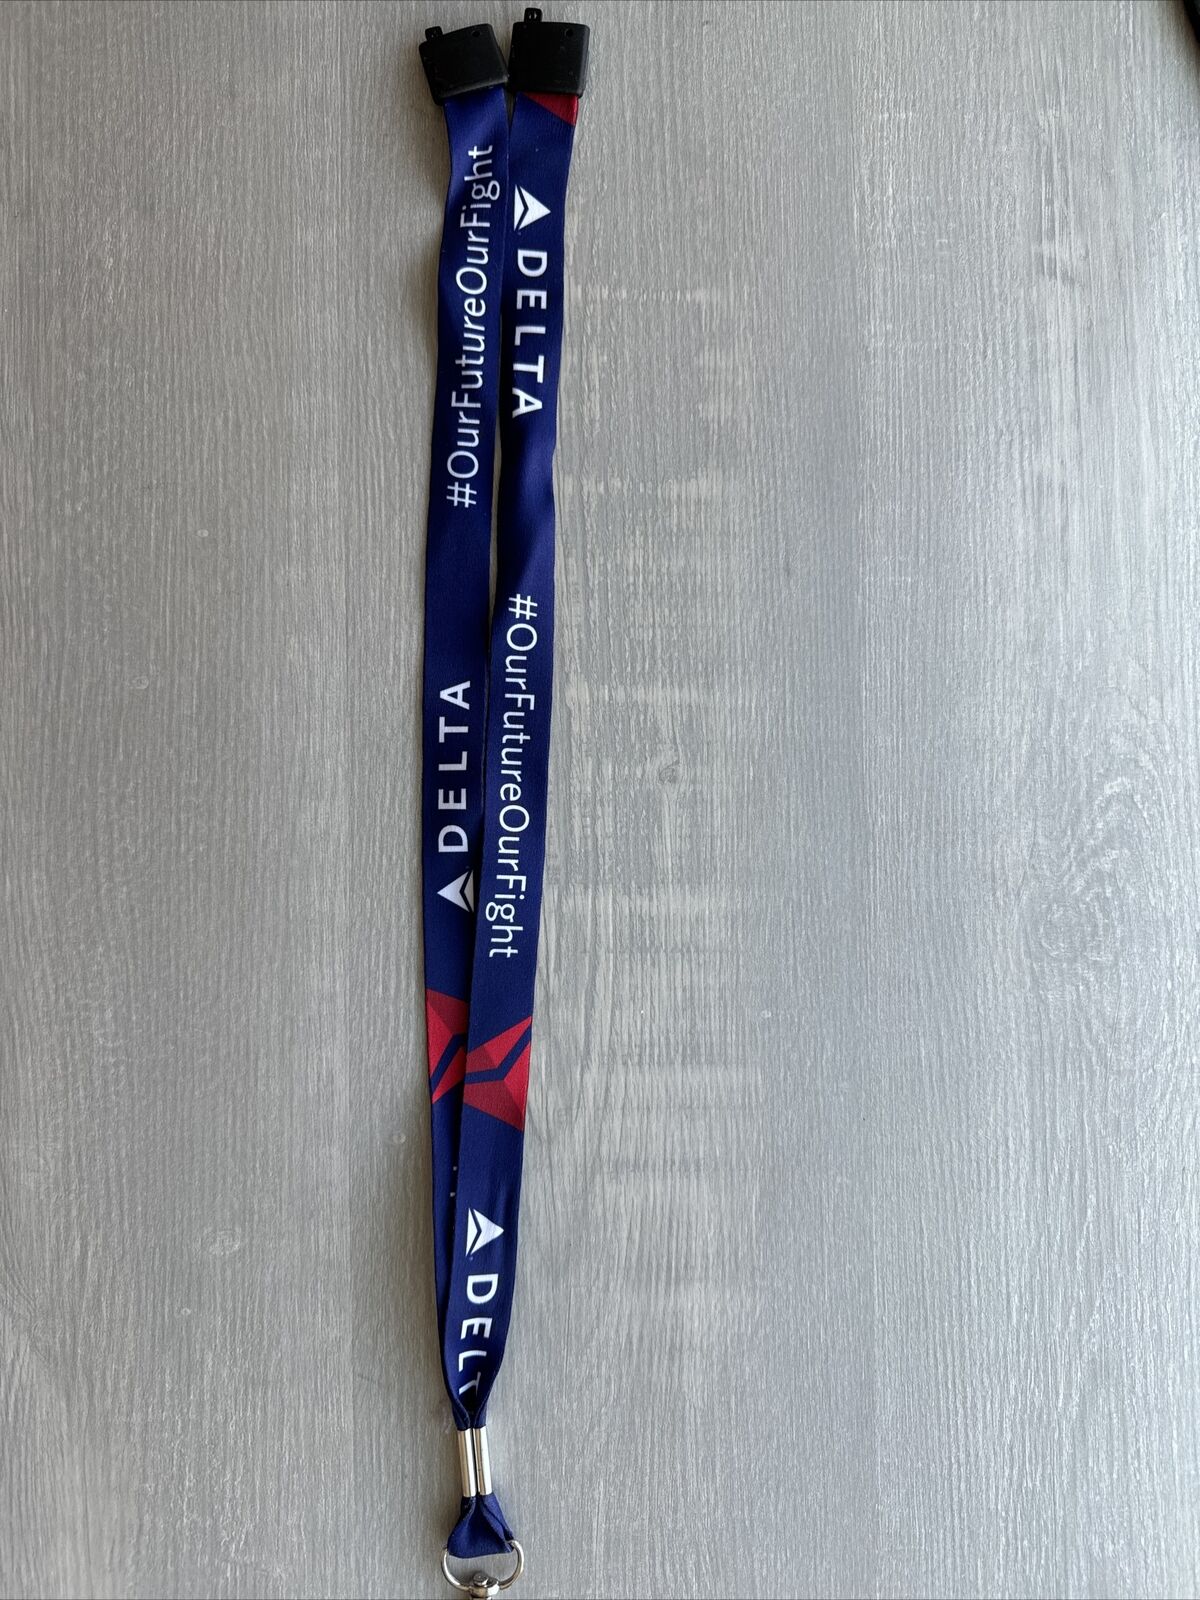 Delta Air Lines - Our Future Our Flight - Lanyard